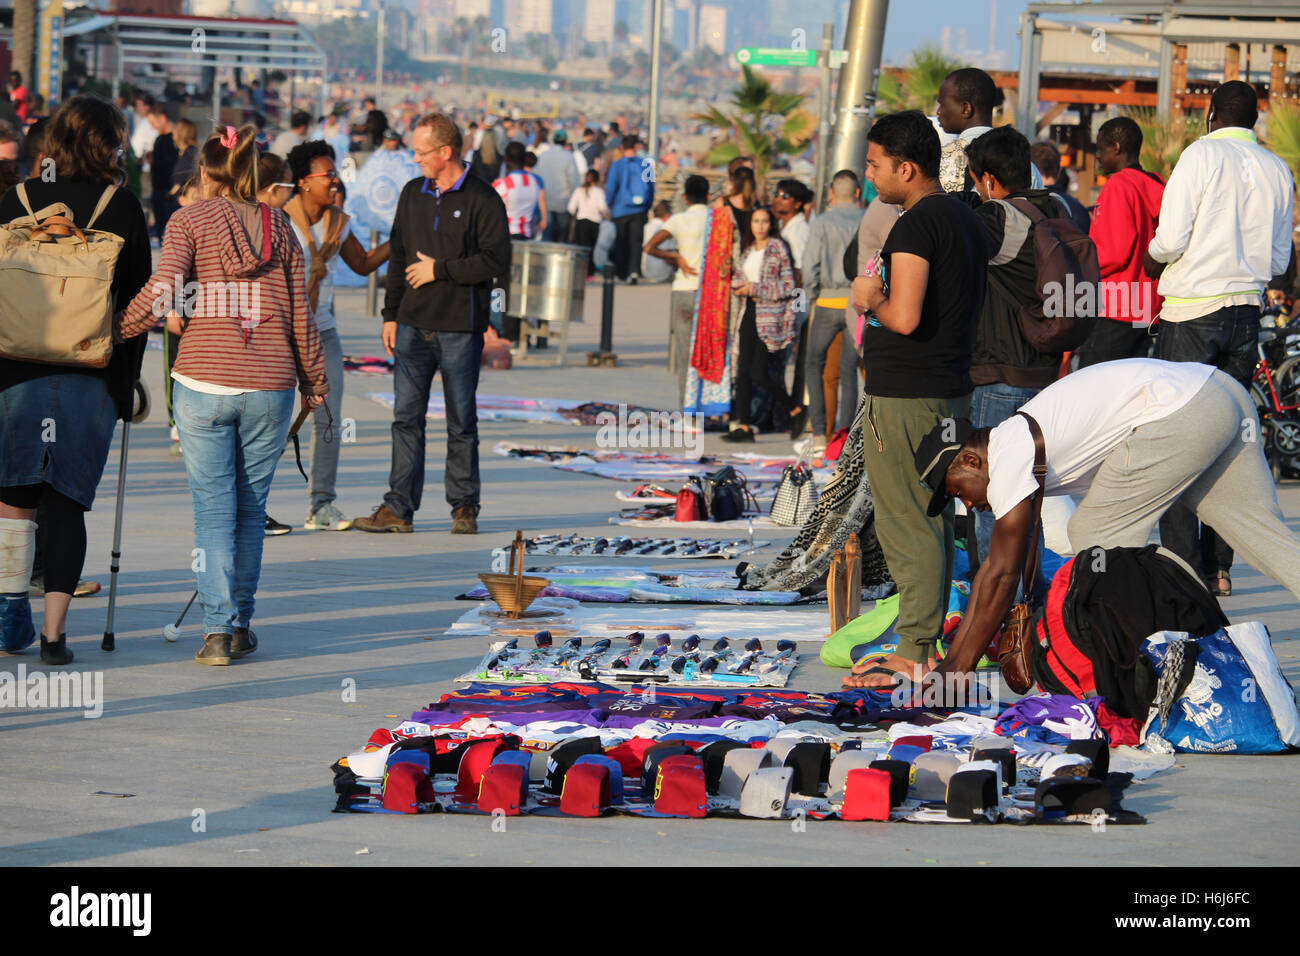 Barcelona, Spain - October 29, 2016: Illegal sellers of fake branded clothes on the Barceloneta beach. Although it is illegal, the phenomenon called "top manta" is extended in central Barcelona, with hundreds of street sellers in the most popular tourist locations of the city Credit:  Dino Geromella/Alamy Live News Stock Photo